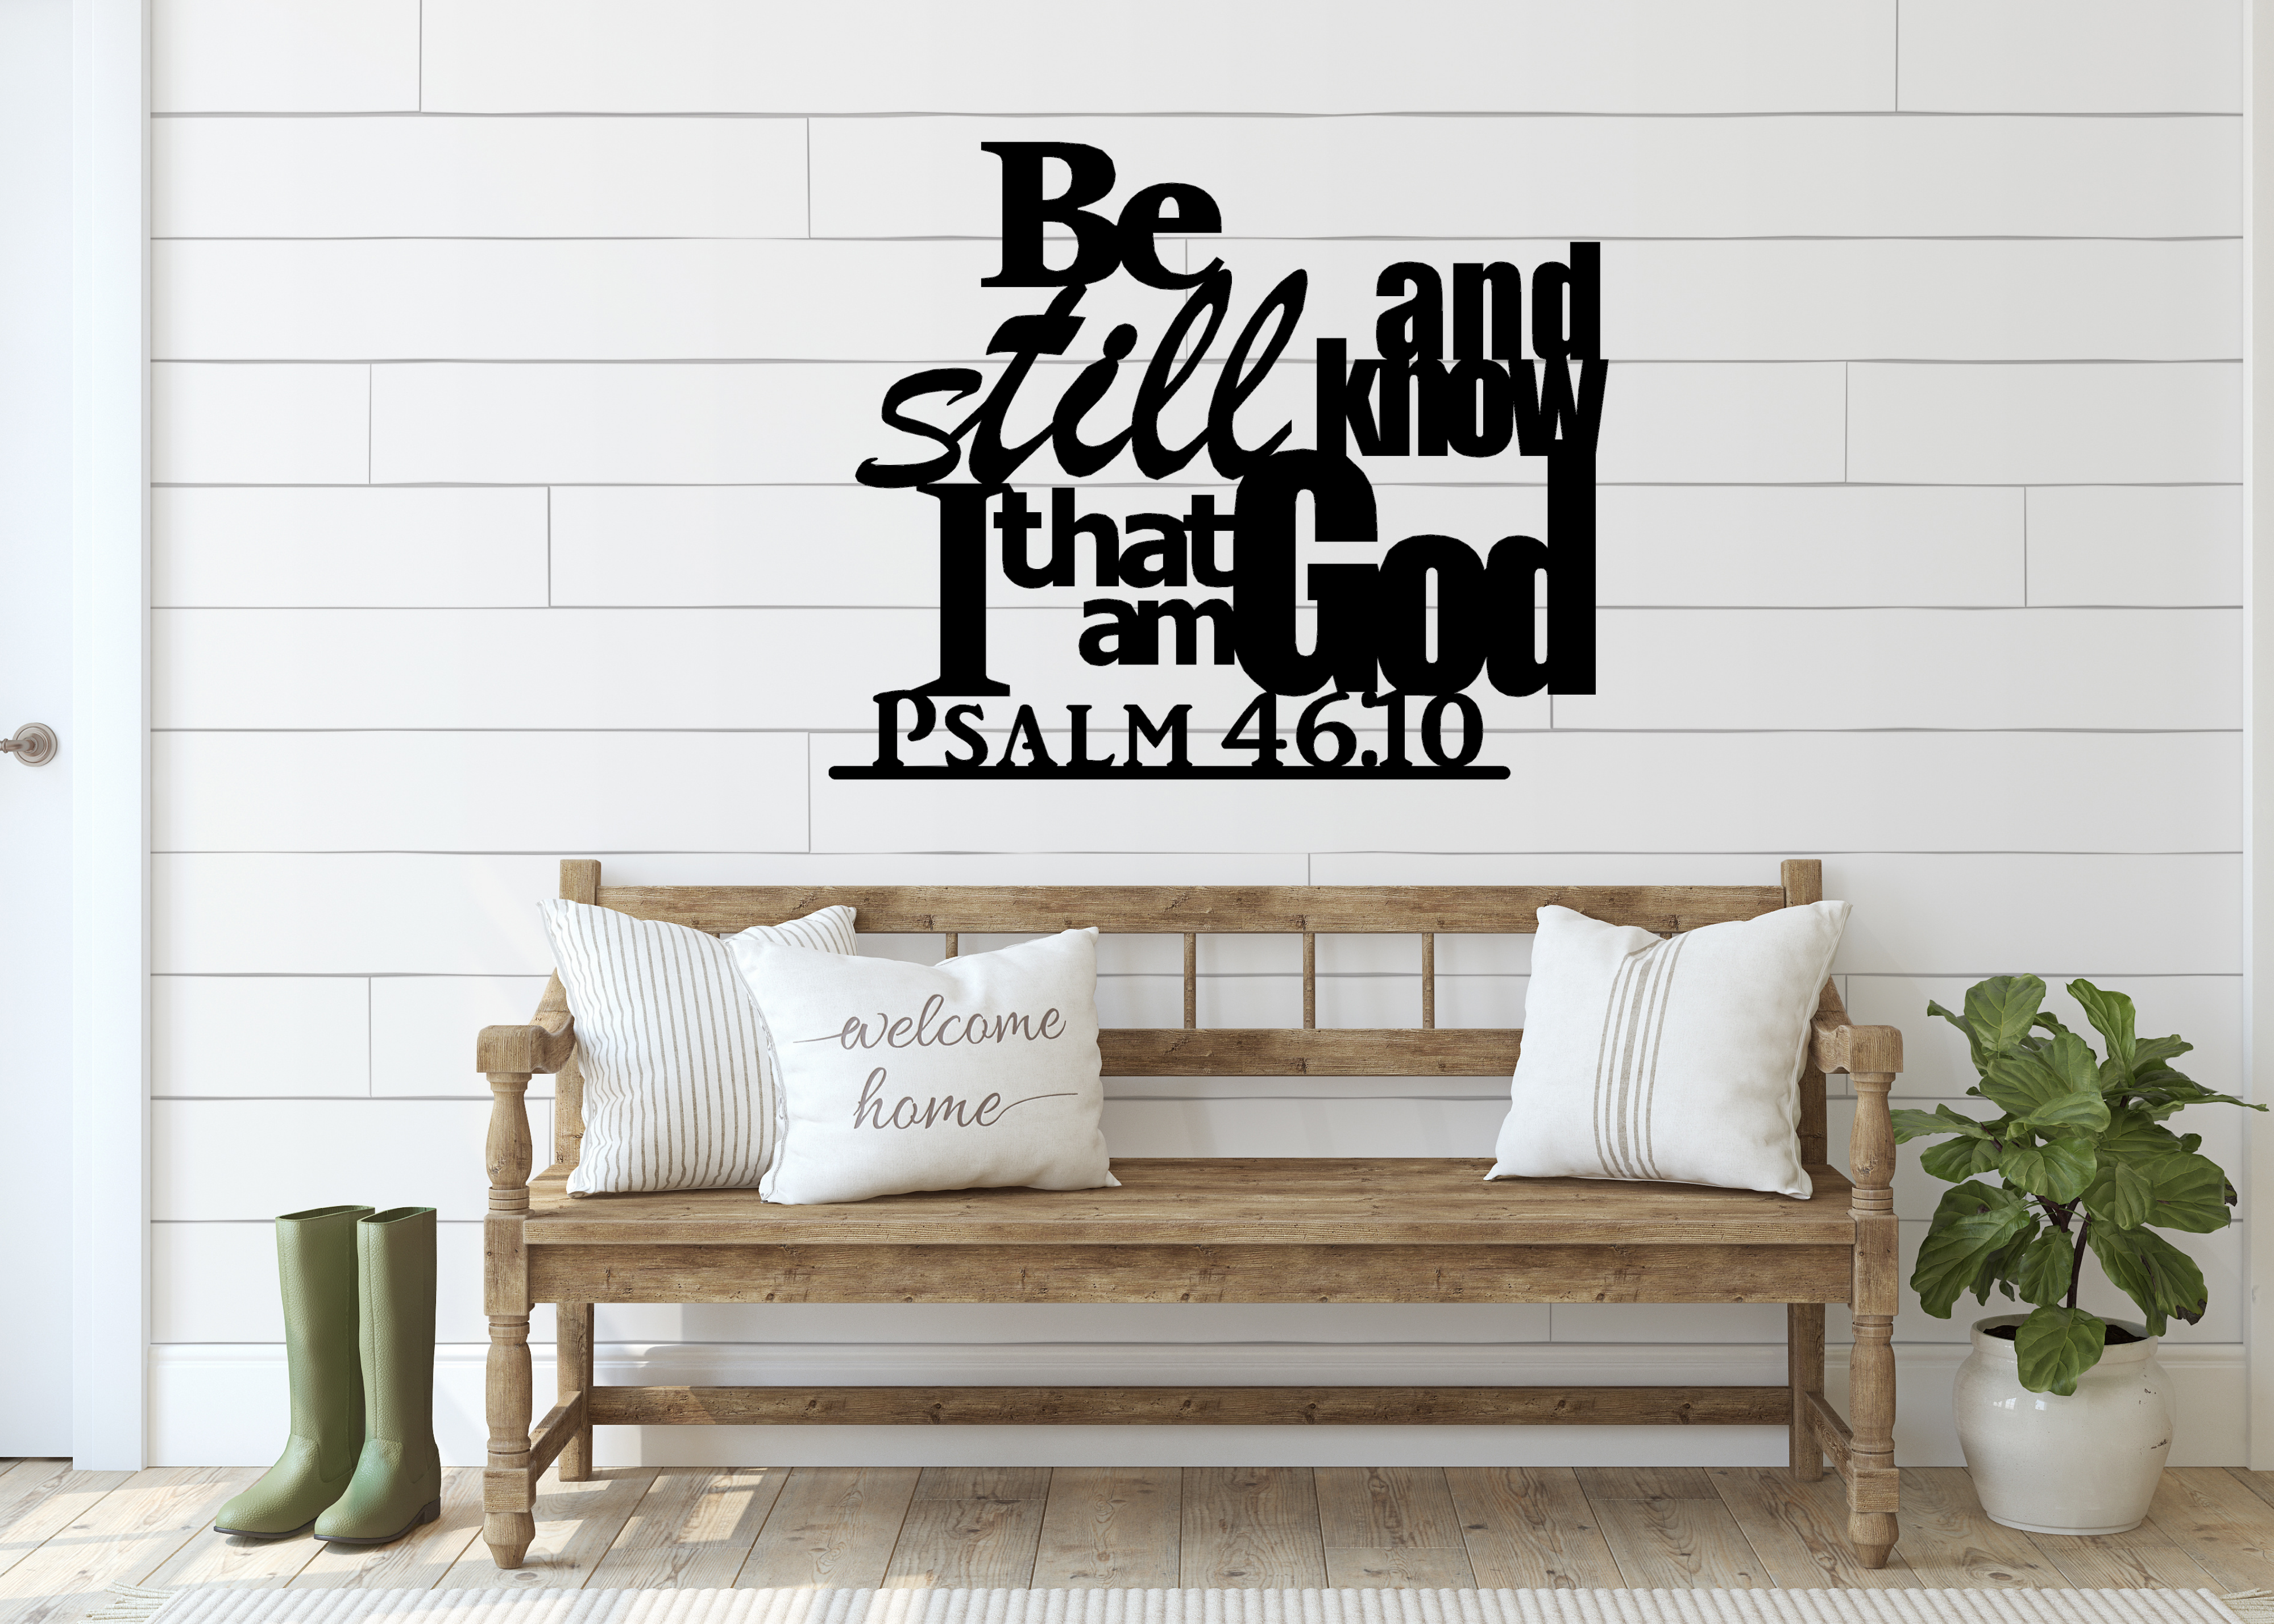 Psalm 46:10 Metal Verse Home Decor Sign. Be Still and Know that I am God Metal Sign. LAG Metal Worx